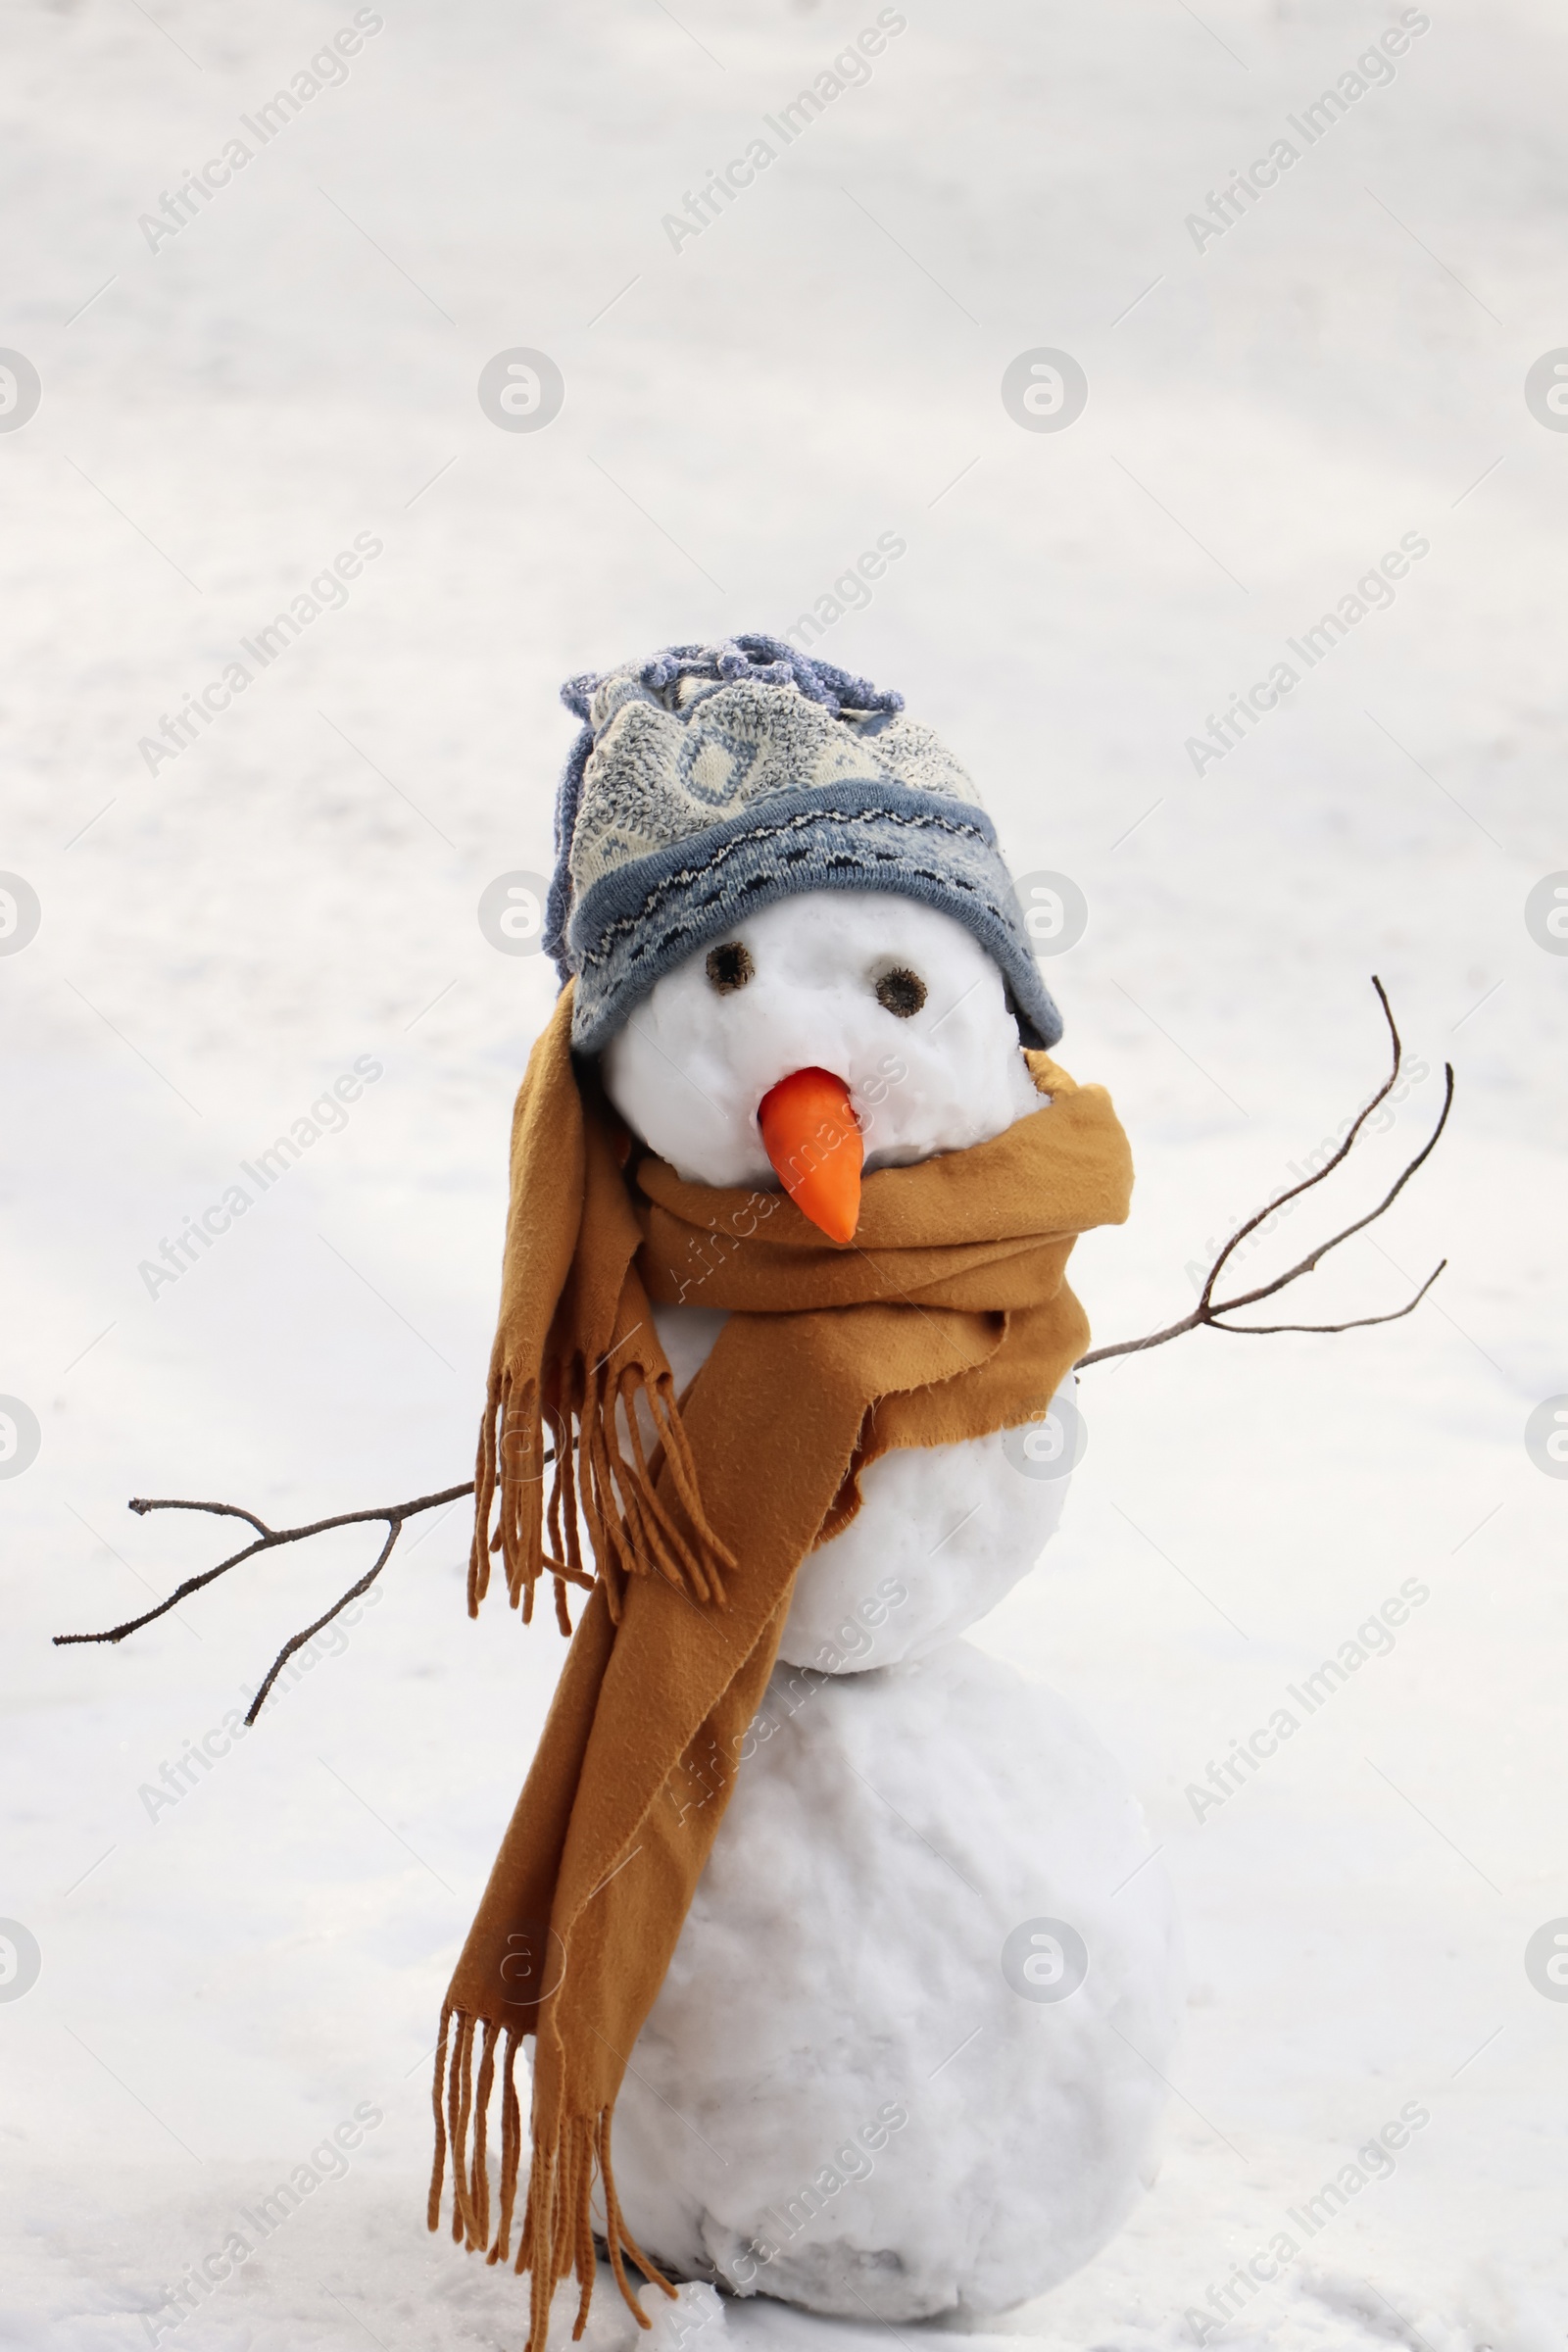 Photo of Funny snowman with scarf and hat in winter forest